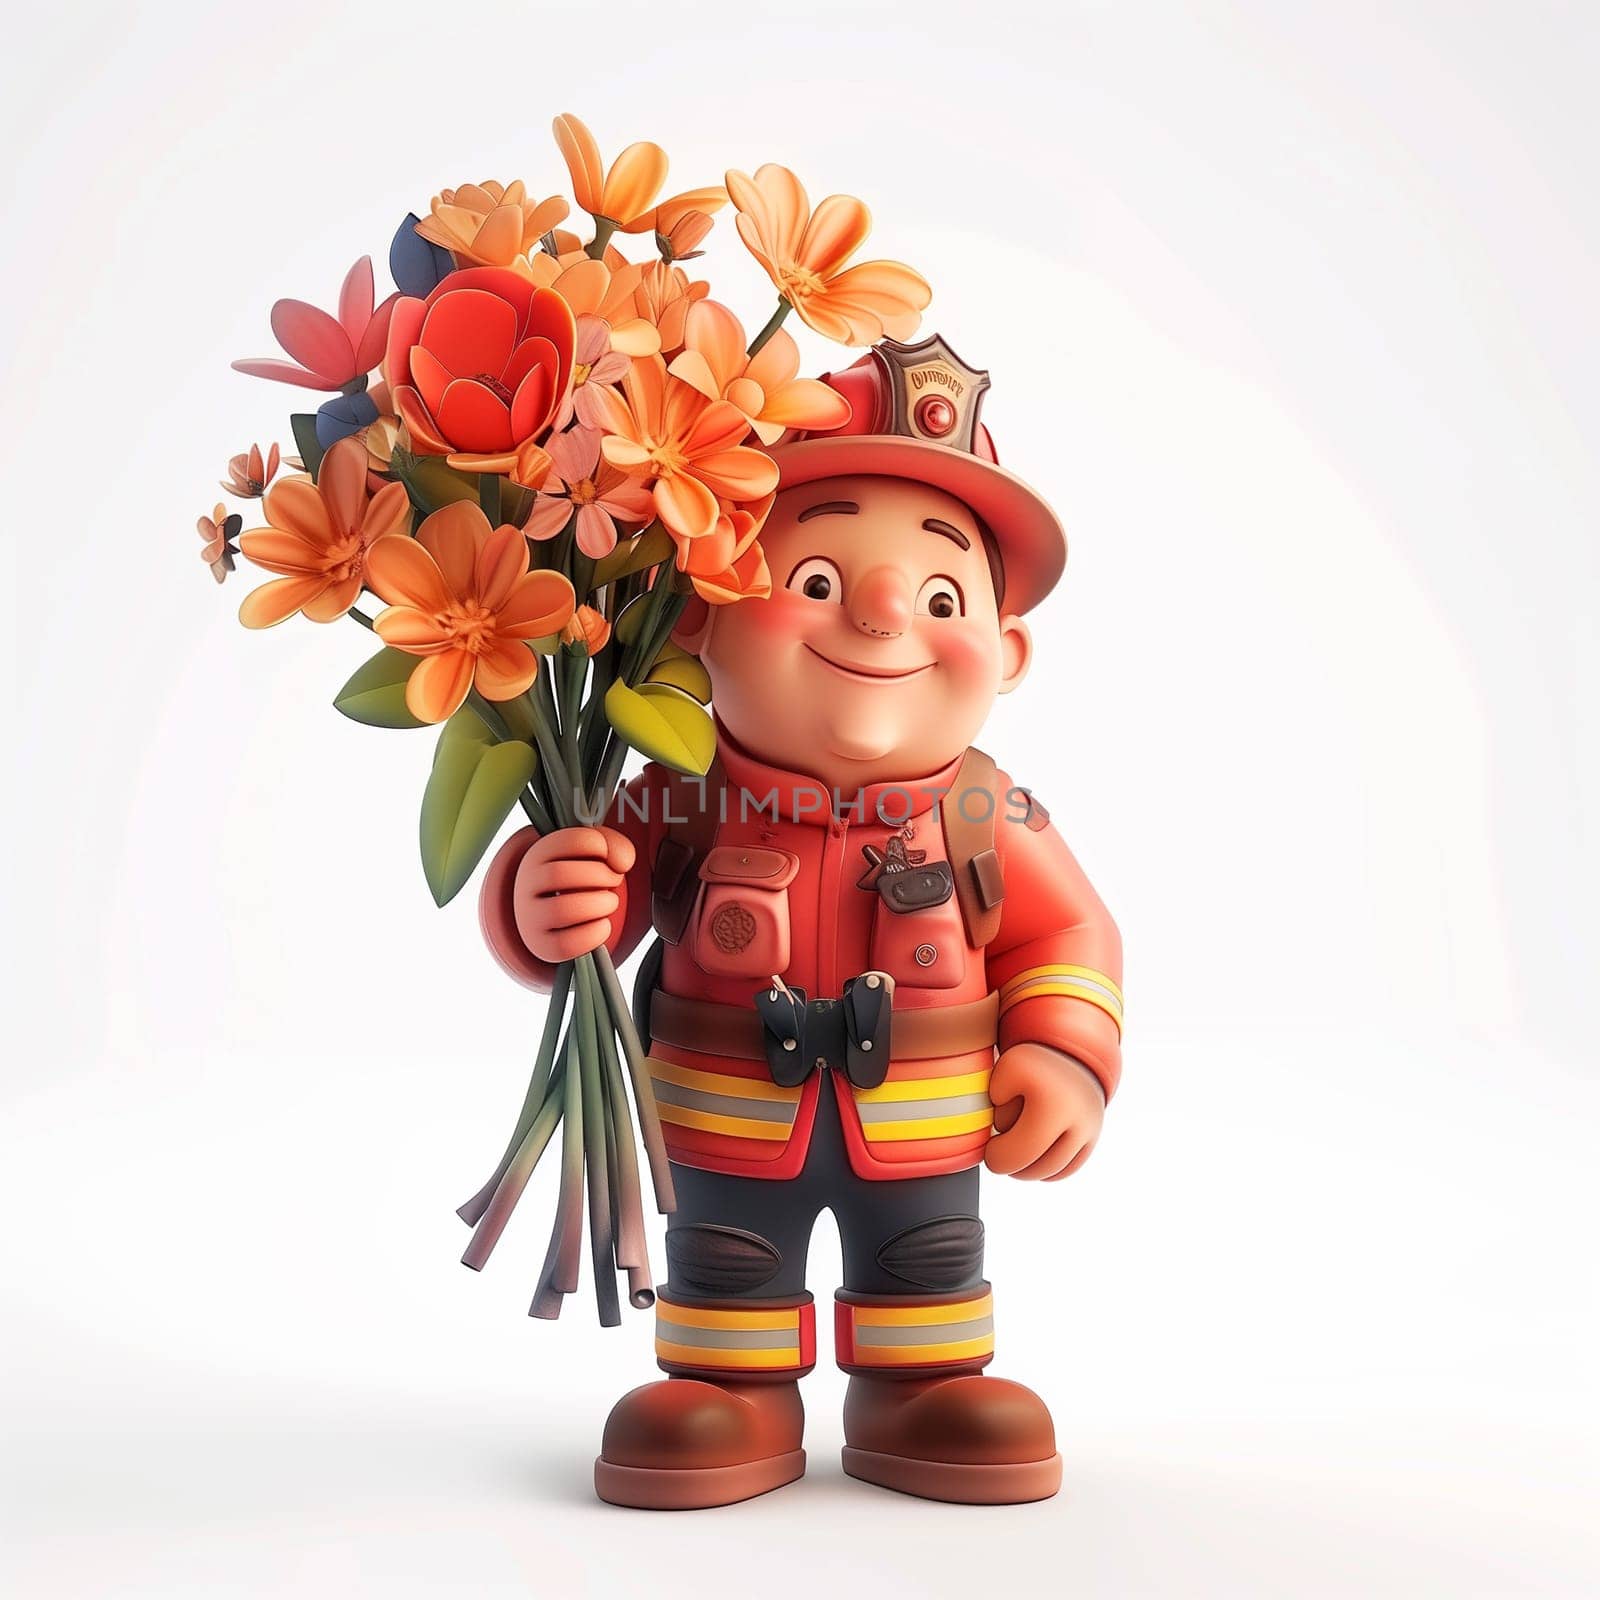 A miniature fireman figurine standing and holding a vibrant bouquet of flowers.